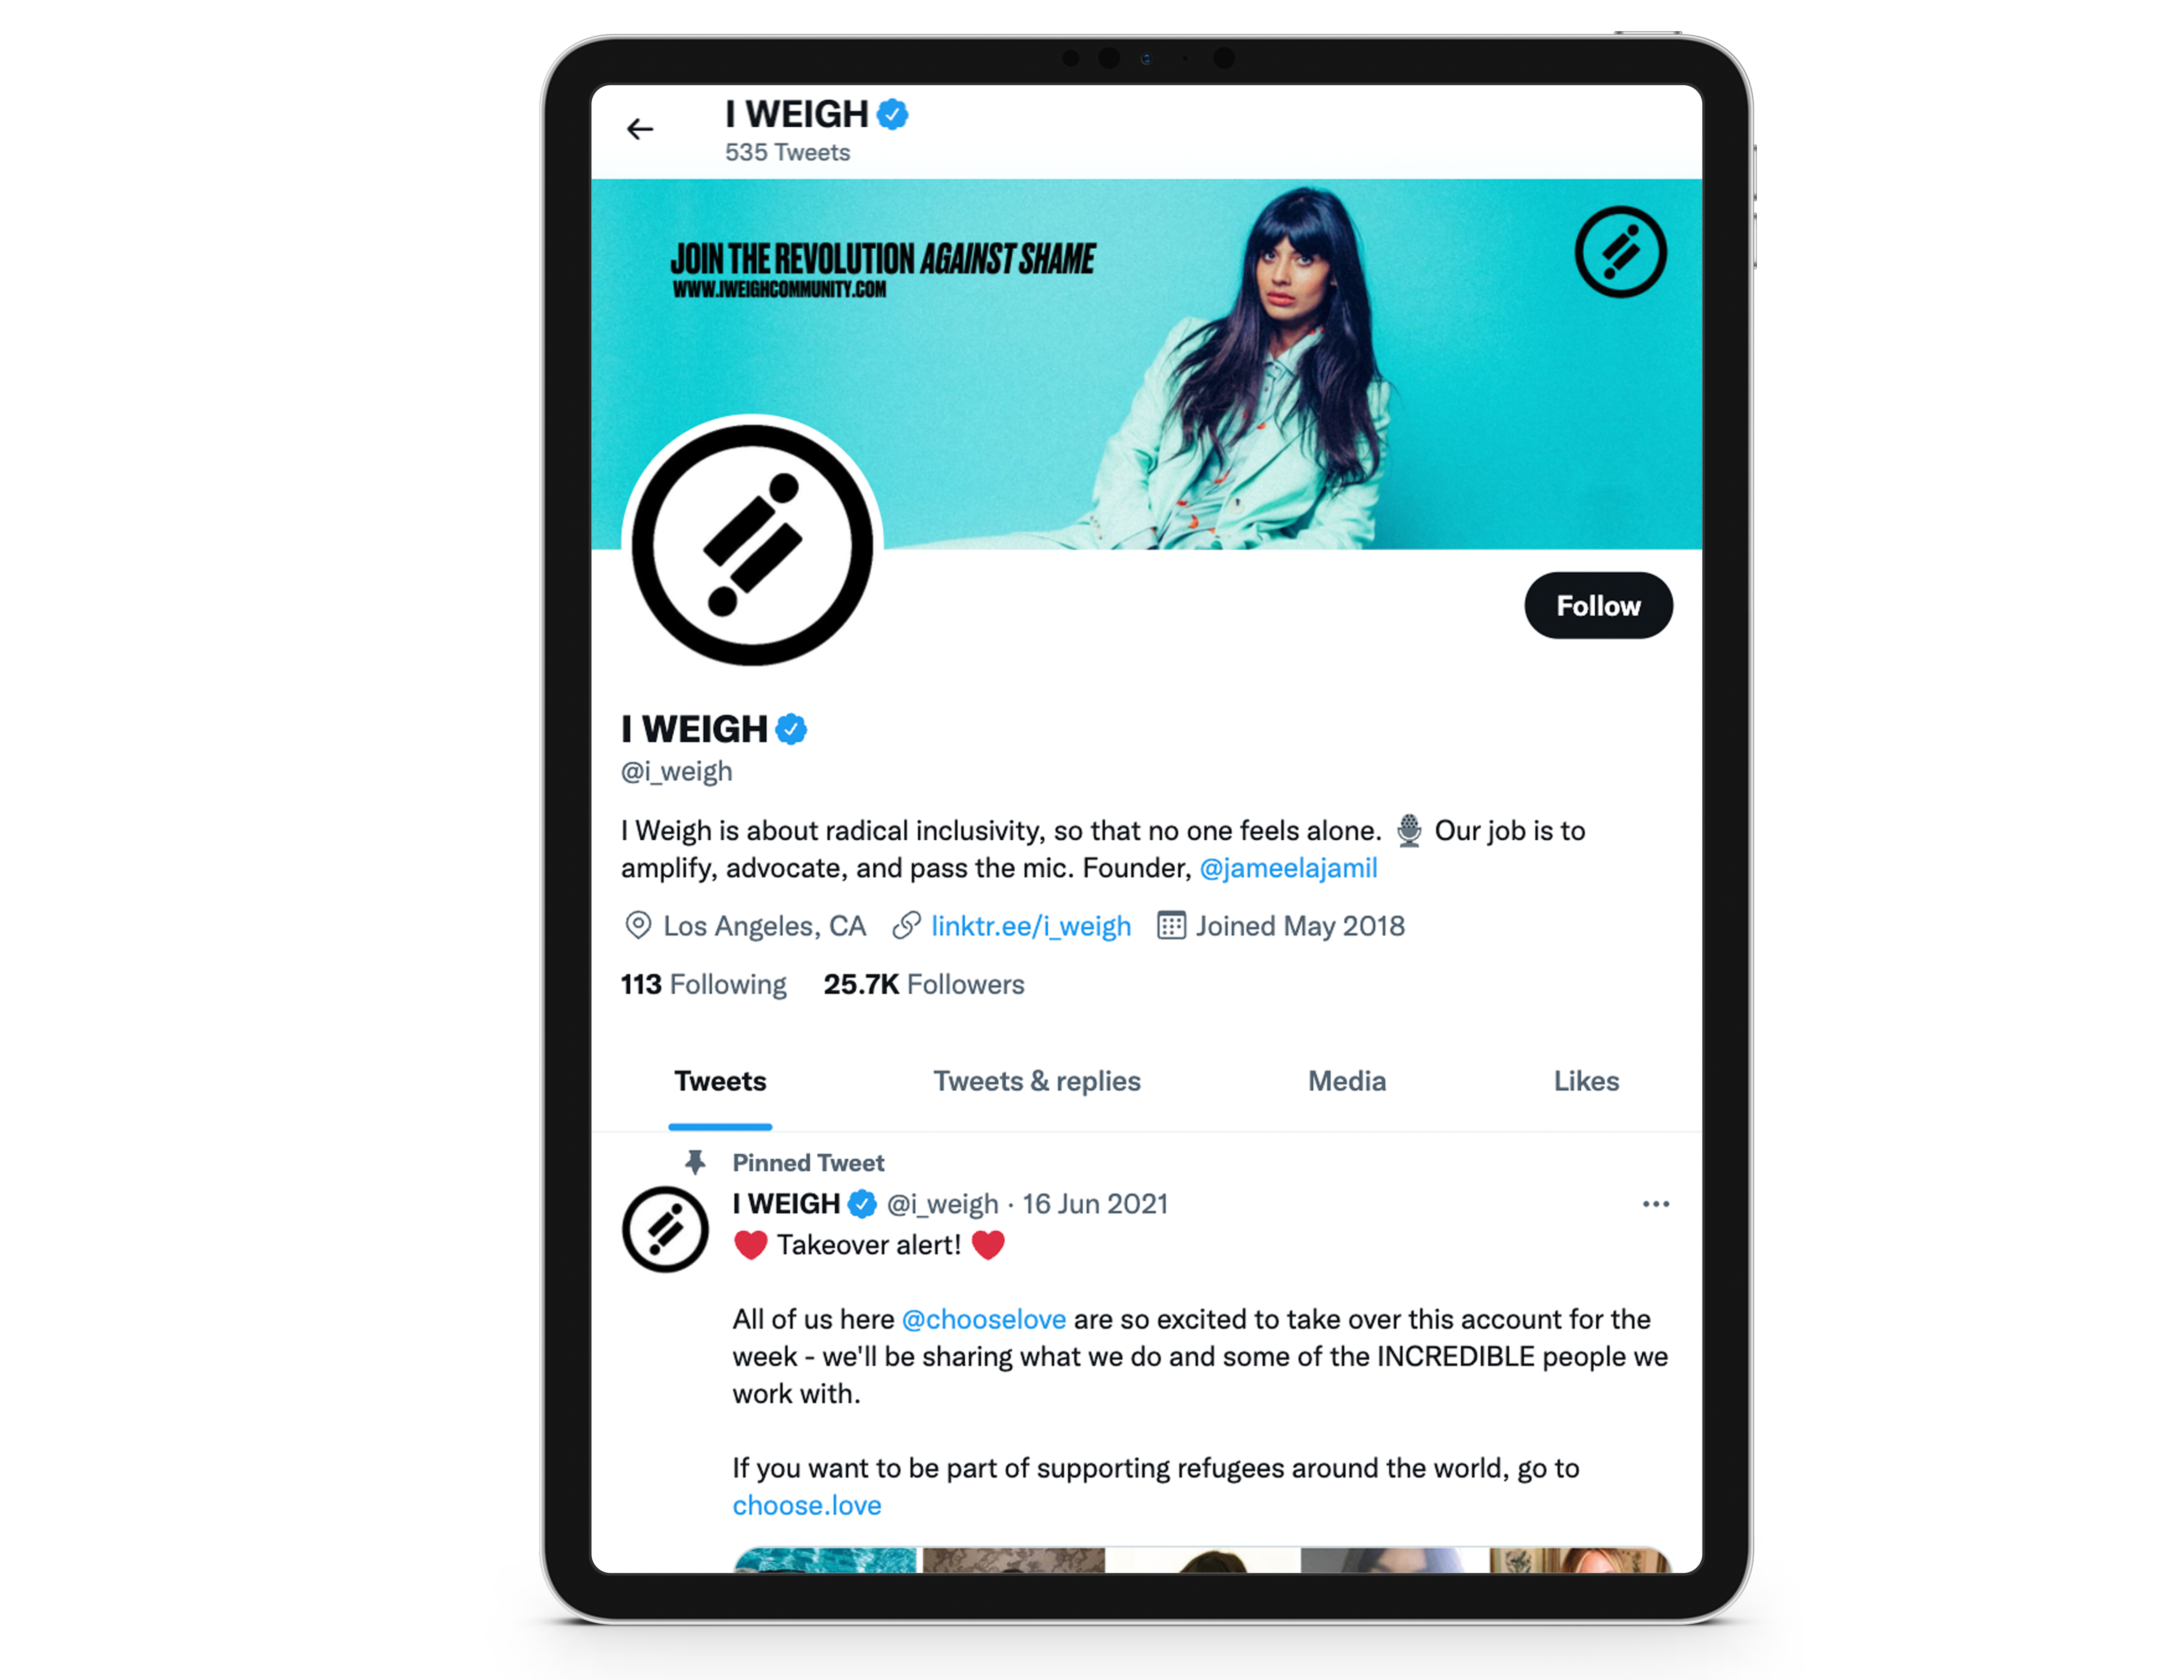 iPad screen showing I WEIGHS twitter page by Jameela Jamil